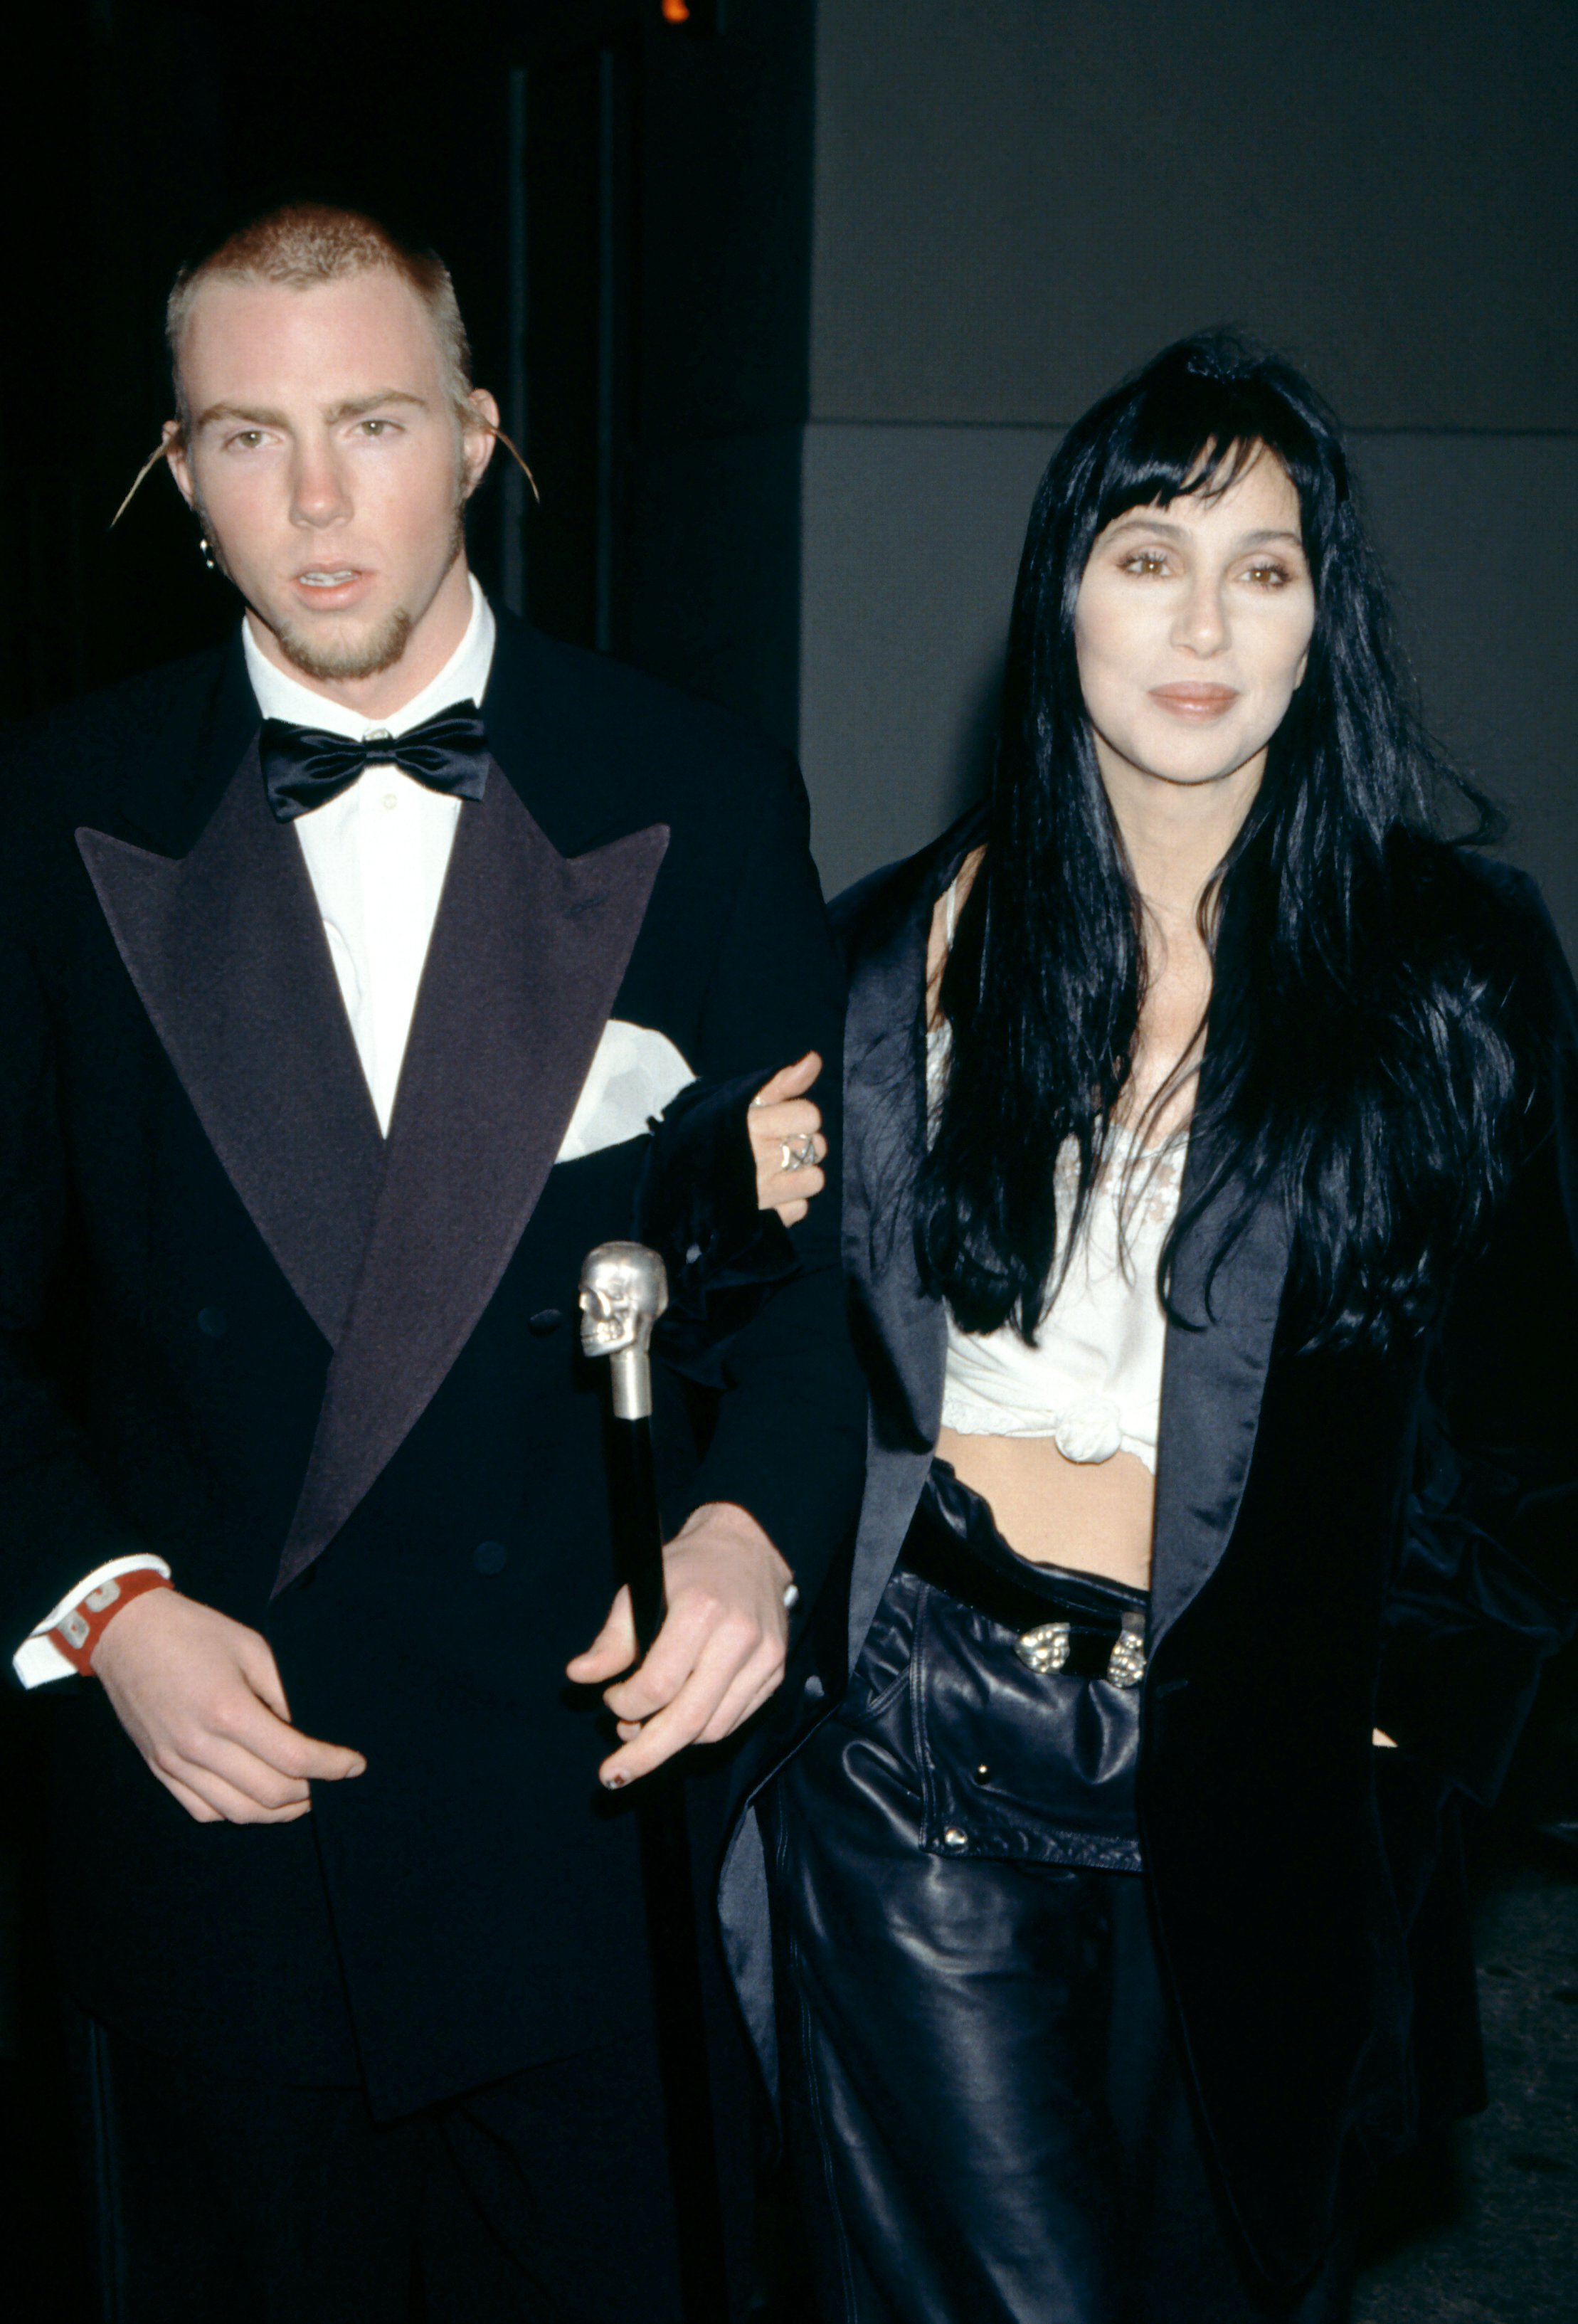  Elijah Blue Allman and his mother American singer Cher attend the 5th Annual Fire and Ice Ball to Benefit Revlon UCLA Women Cancer Center on December 7, 1994